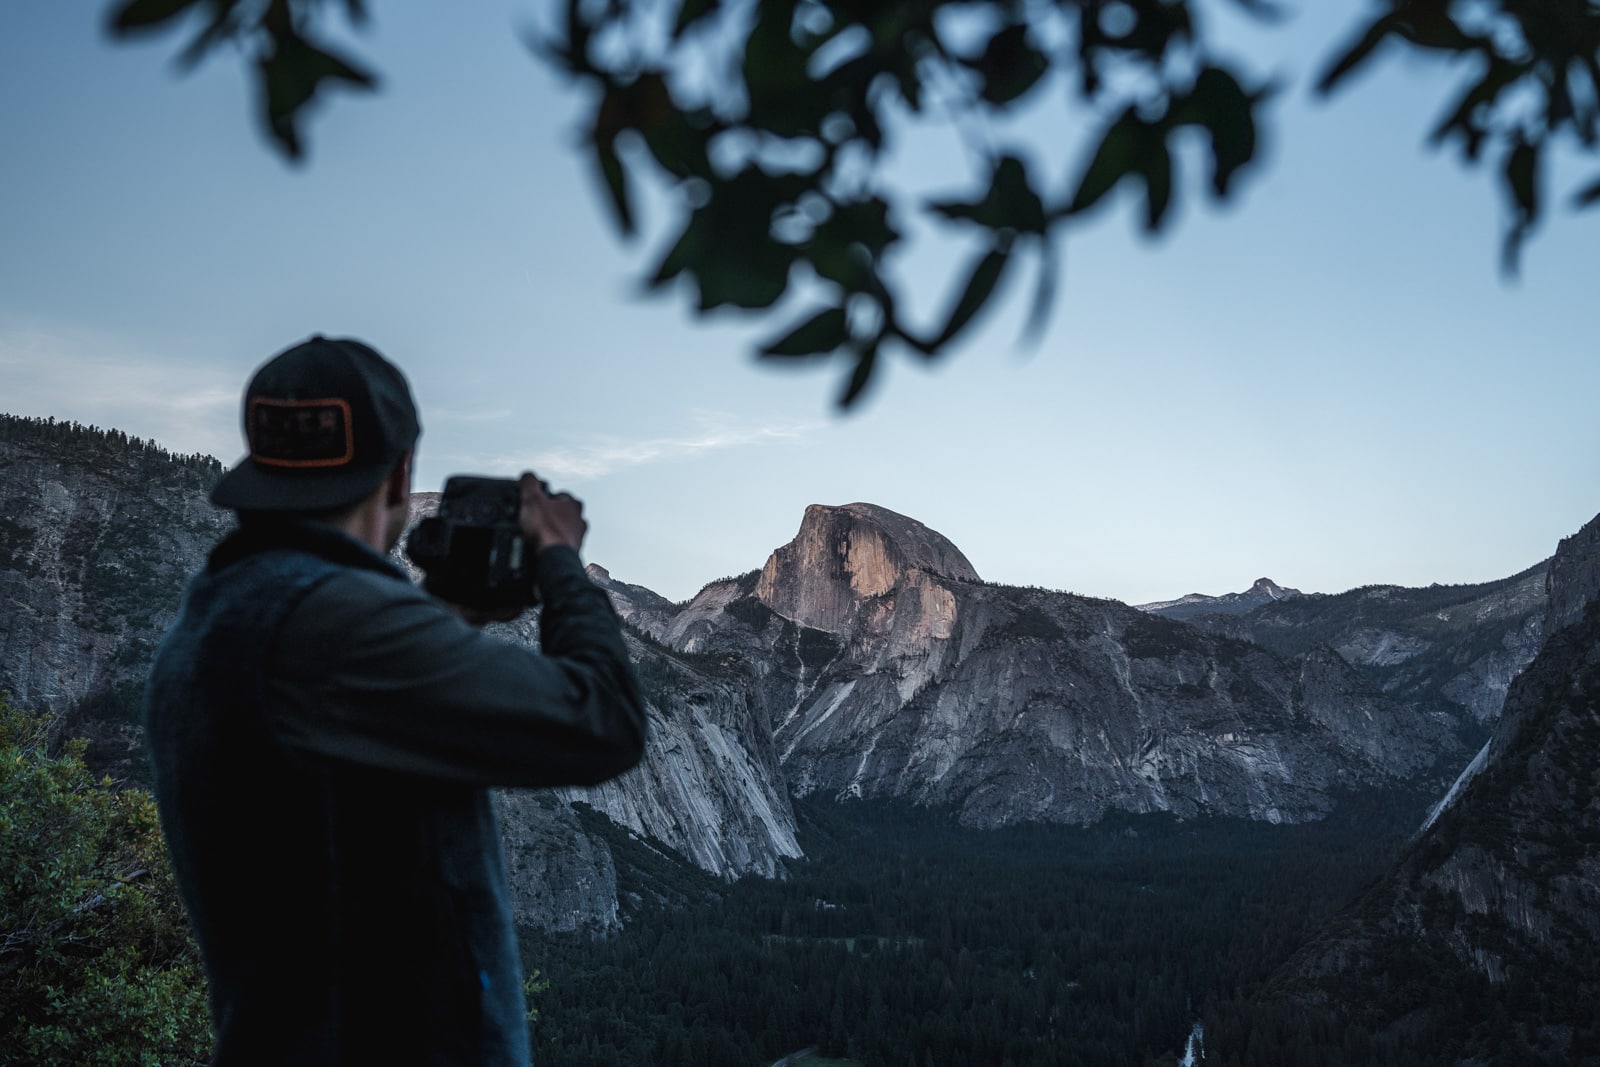 KEH Camera Review: Best Place to Sell Used Cameras? - TravelFreak